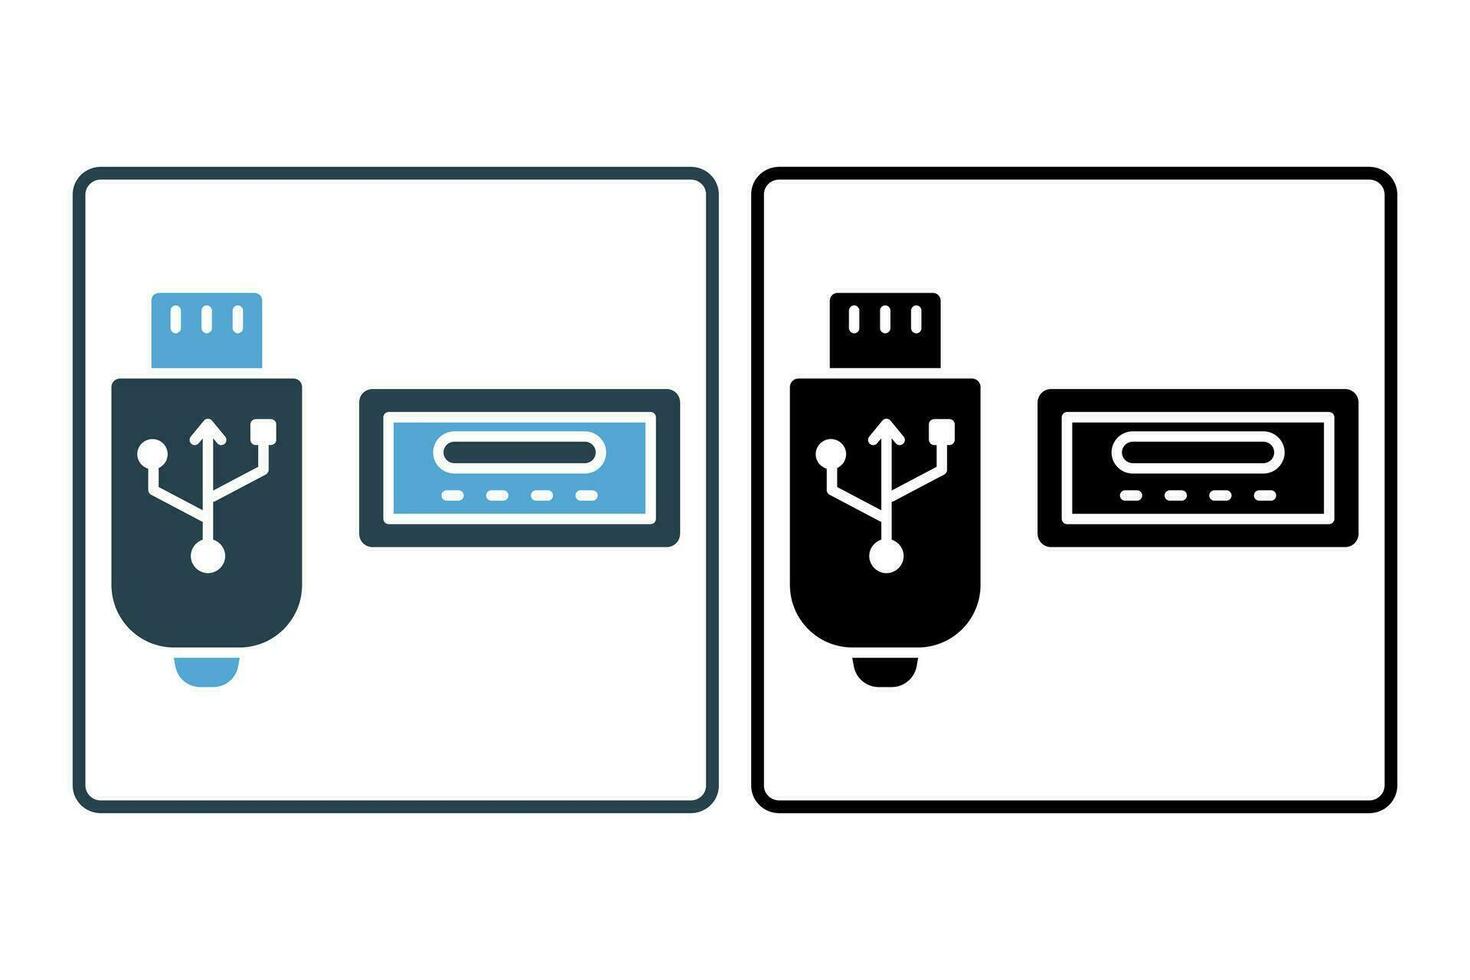 usb port icon. icon related to device, computer technology. solid icon style. simple vector design editable